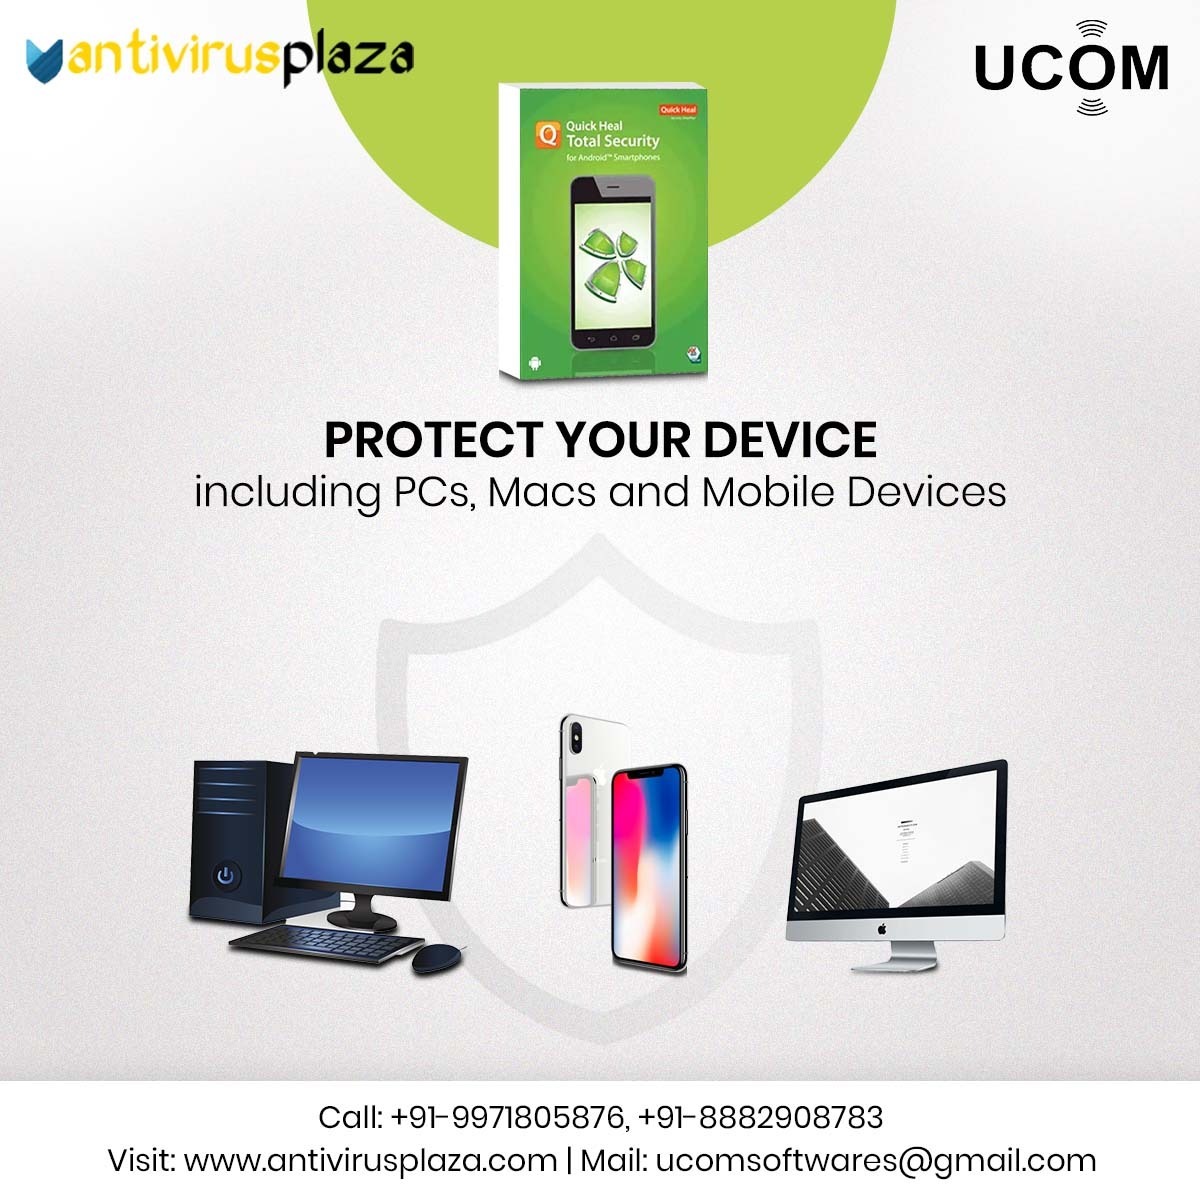 Protect your devices, from PCs to Macs and Mobile, with our comprehensive antivirus. Total security, one solution. 

𝐂𝐚𝐥𝐥: +91-99718 05876
𝐕𝐢𝐬𝐢𝐭 𝐔𝐬: antivirusplaza.com

#AntivirusPlaza #InternetSecurity #MobileSecurity #OnlineProtection #StaySafeOnline #software